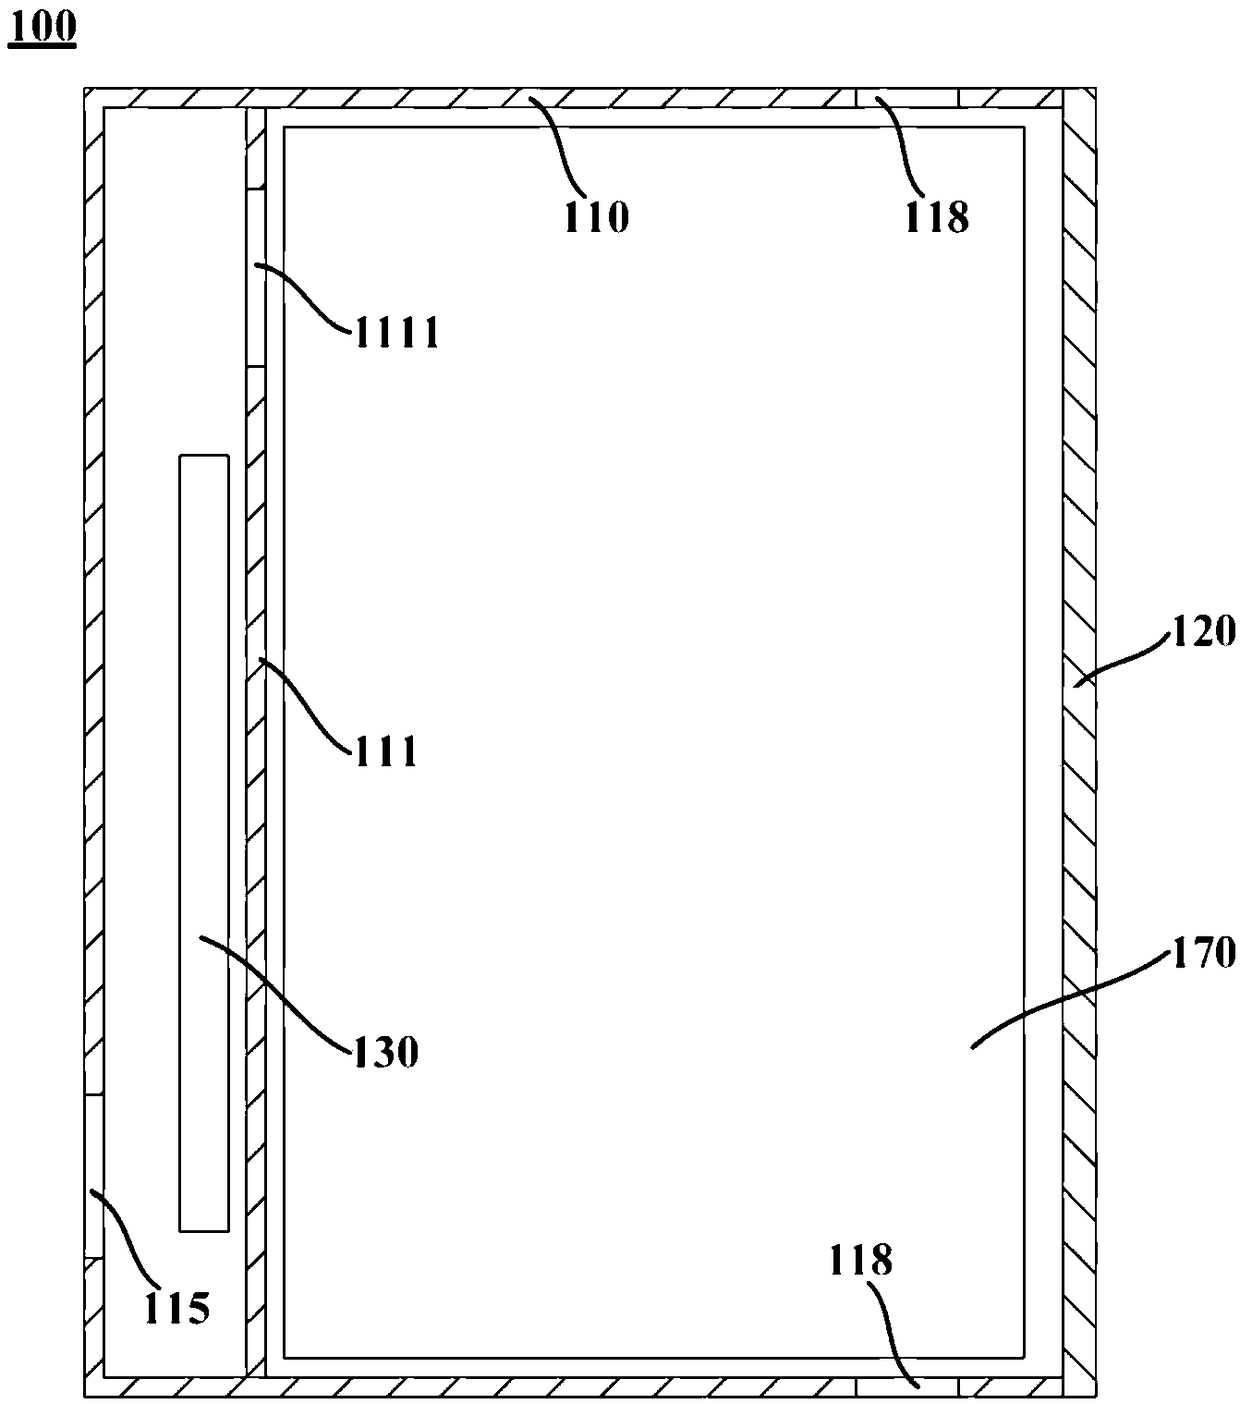 Thawing method used for thawing device